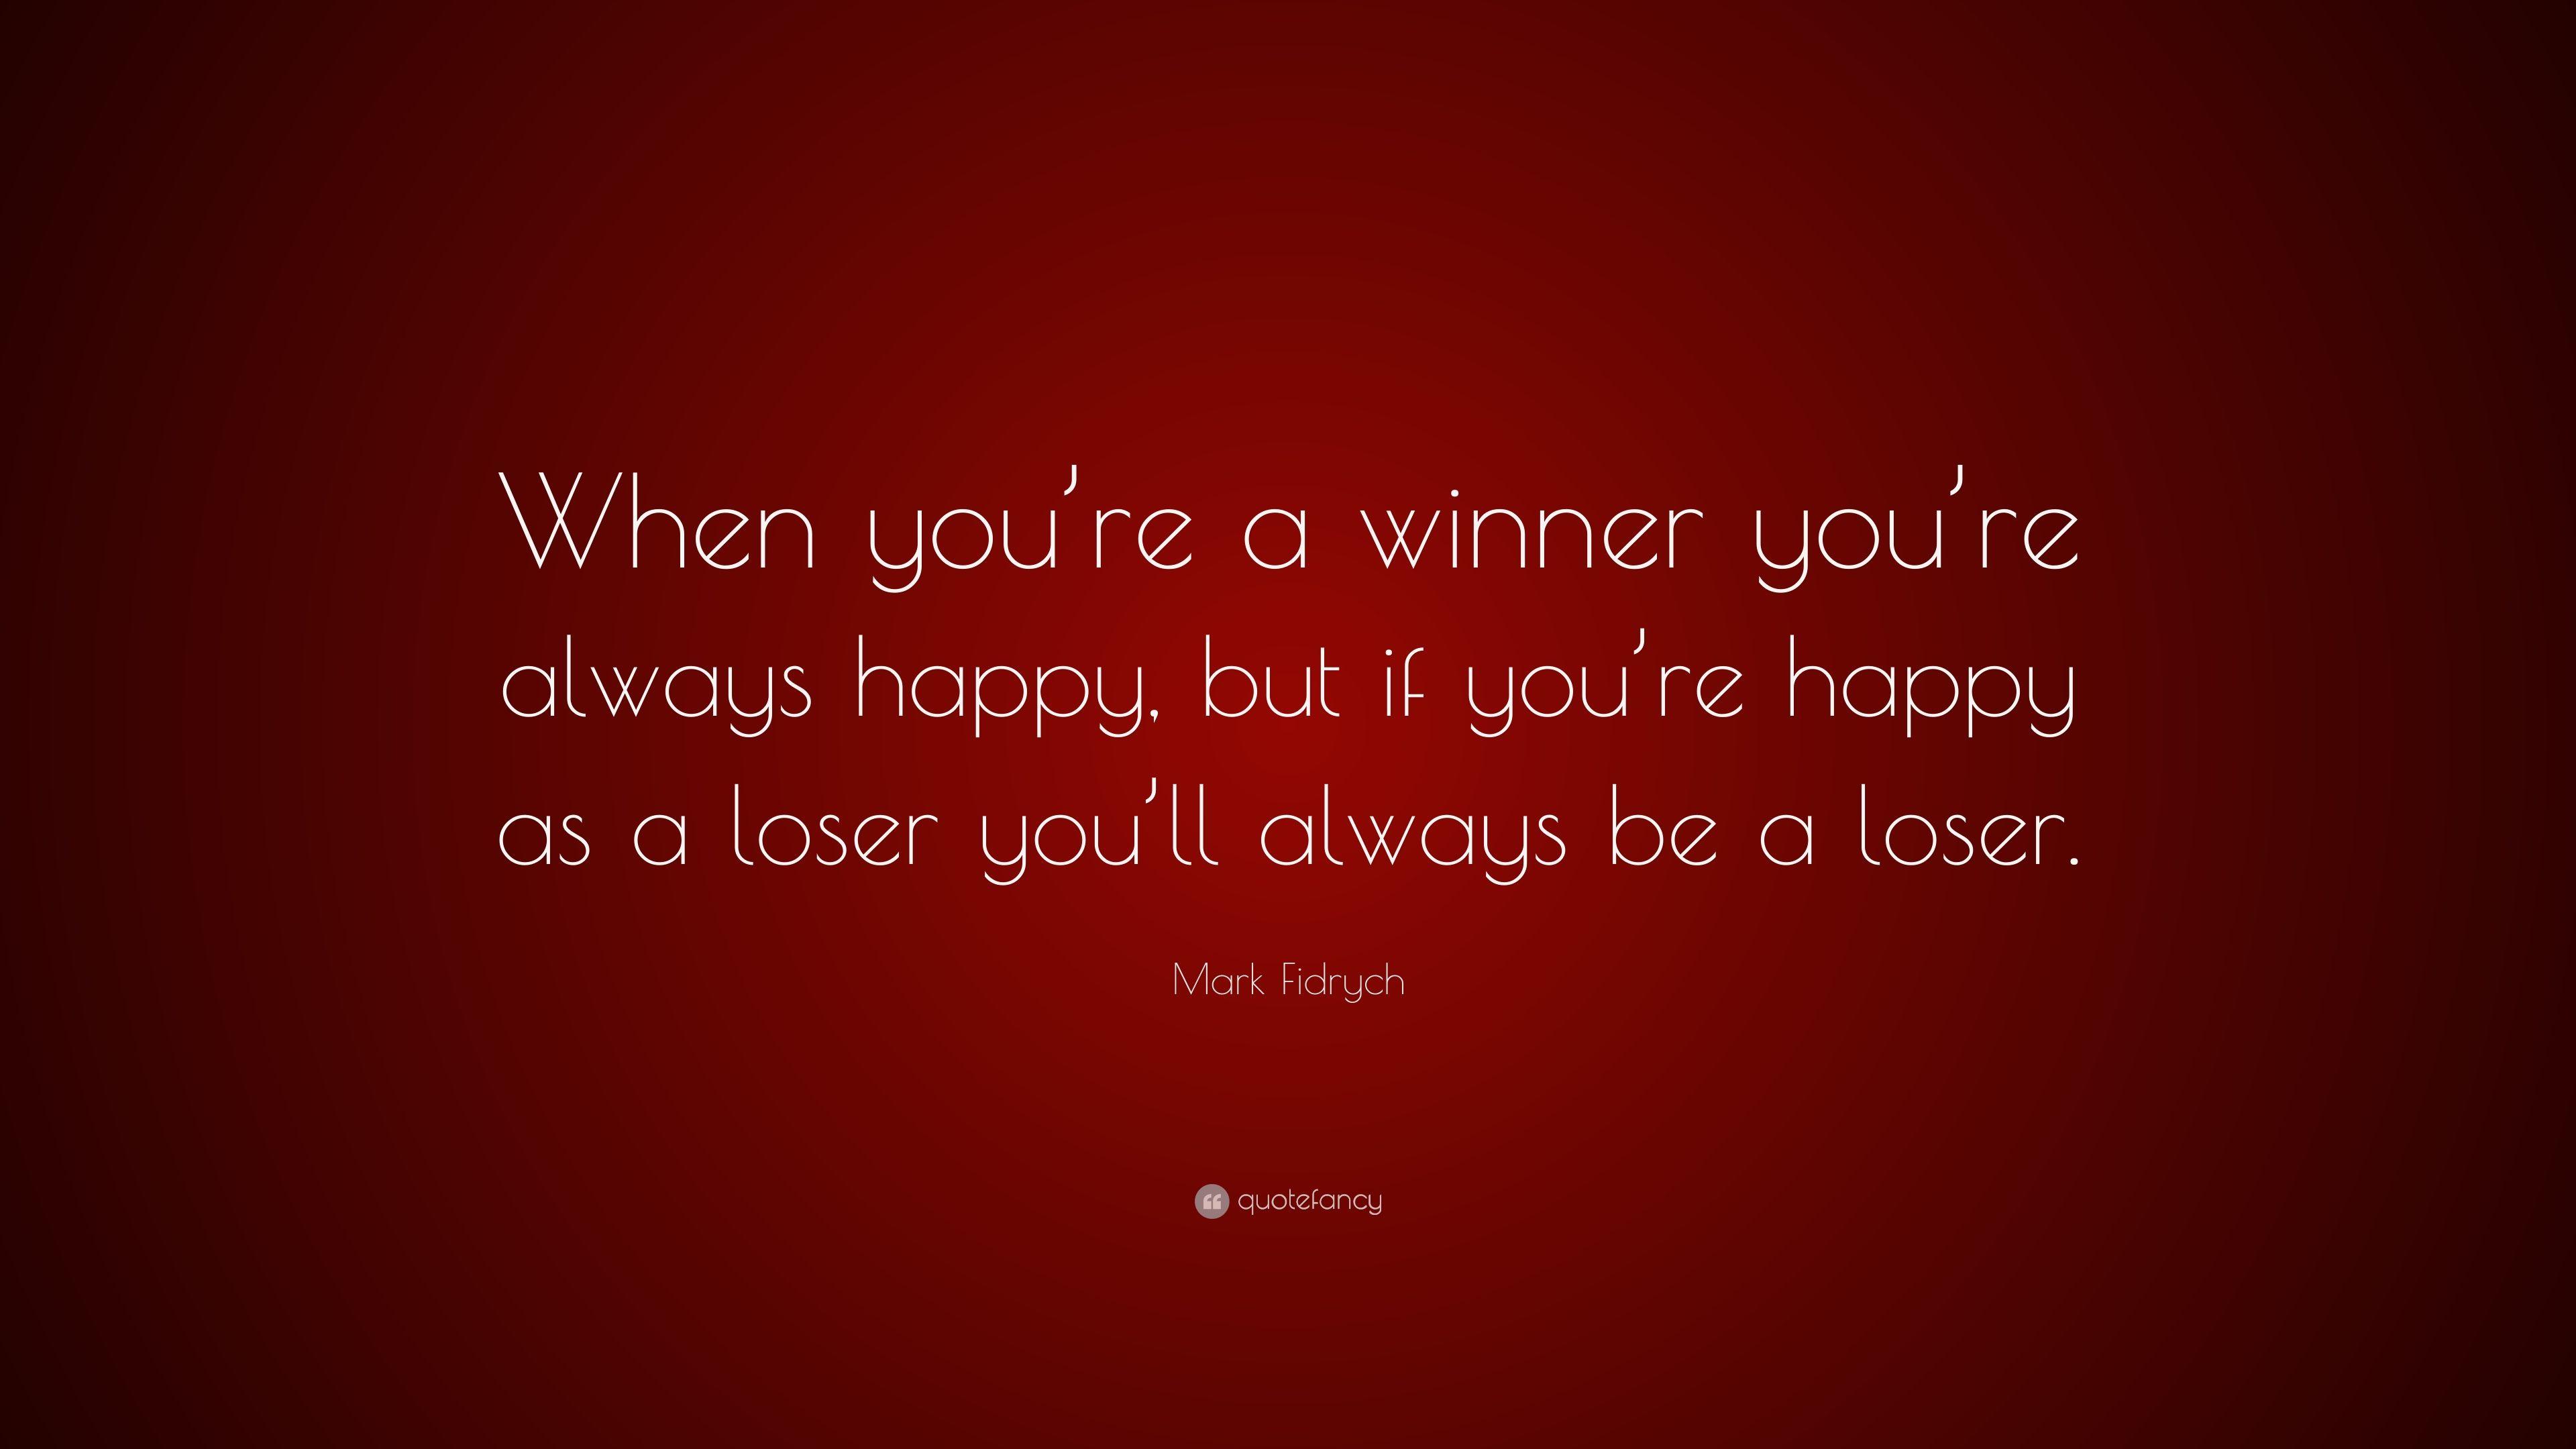 Mark Fidrych Quote: “When you're a winner you're always happy, but